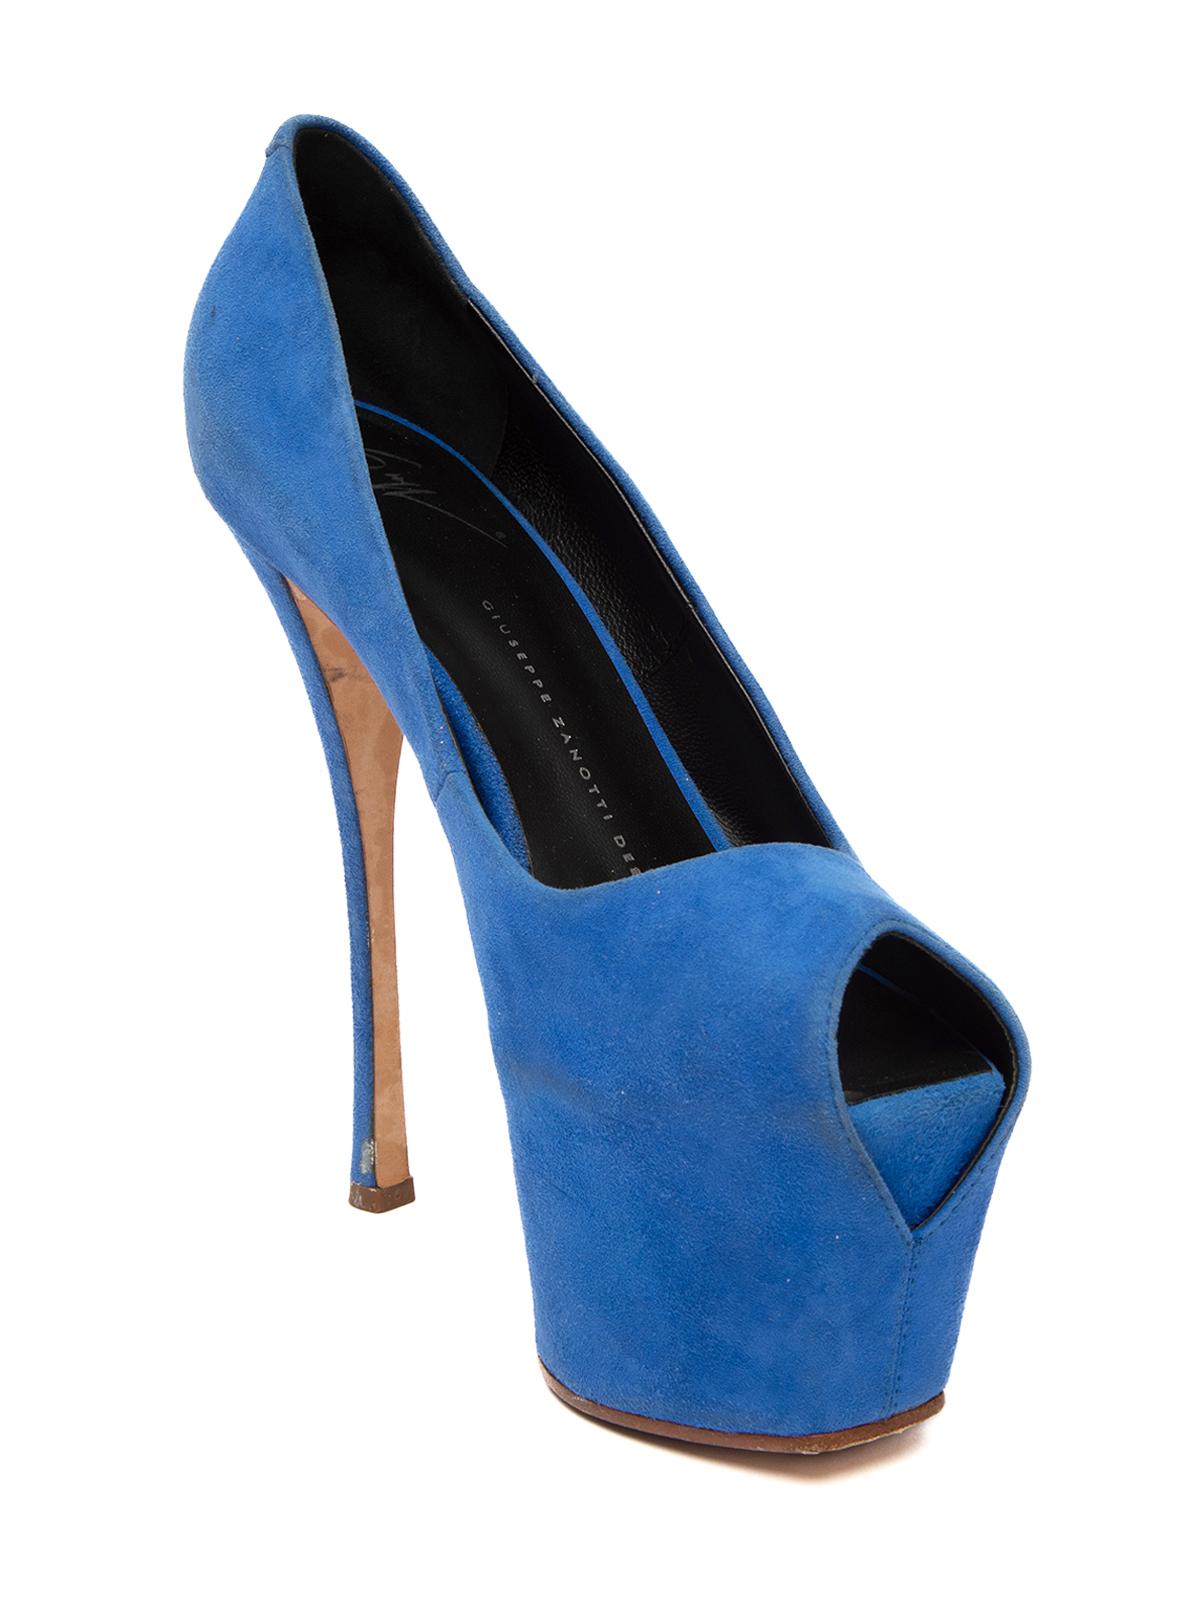 CONDITION is Good. Some wear to heels is evident. Slight discolouration to suede, wear to outer sole on this used Giuseppe Zanotti designer resale item. Details Blue Suede Peep toe Stiletto Double platform Leather insoles embossed with Giuseppe